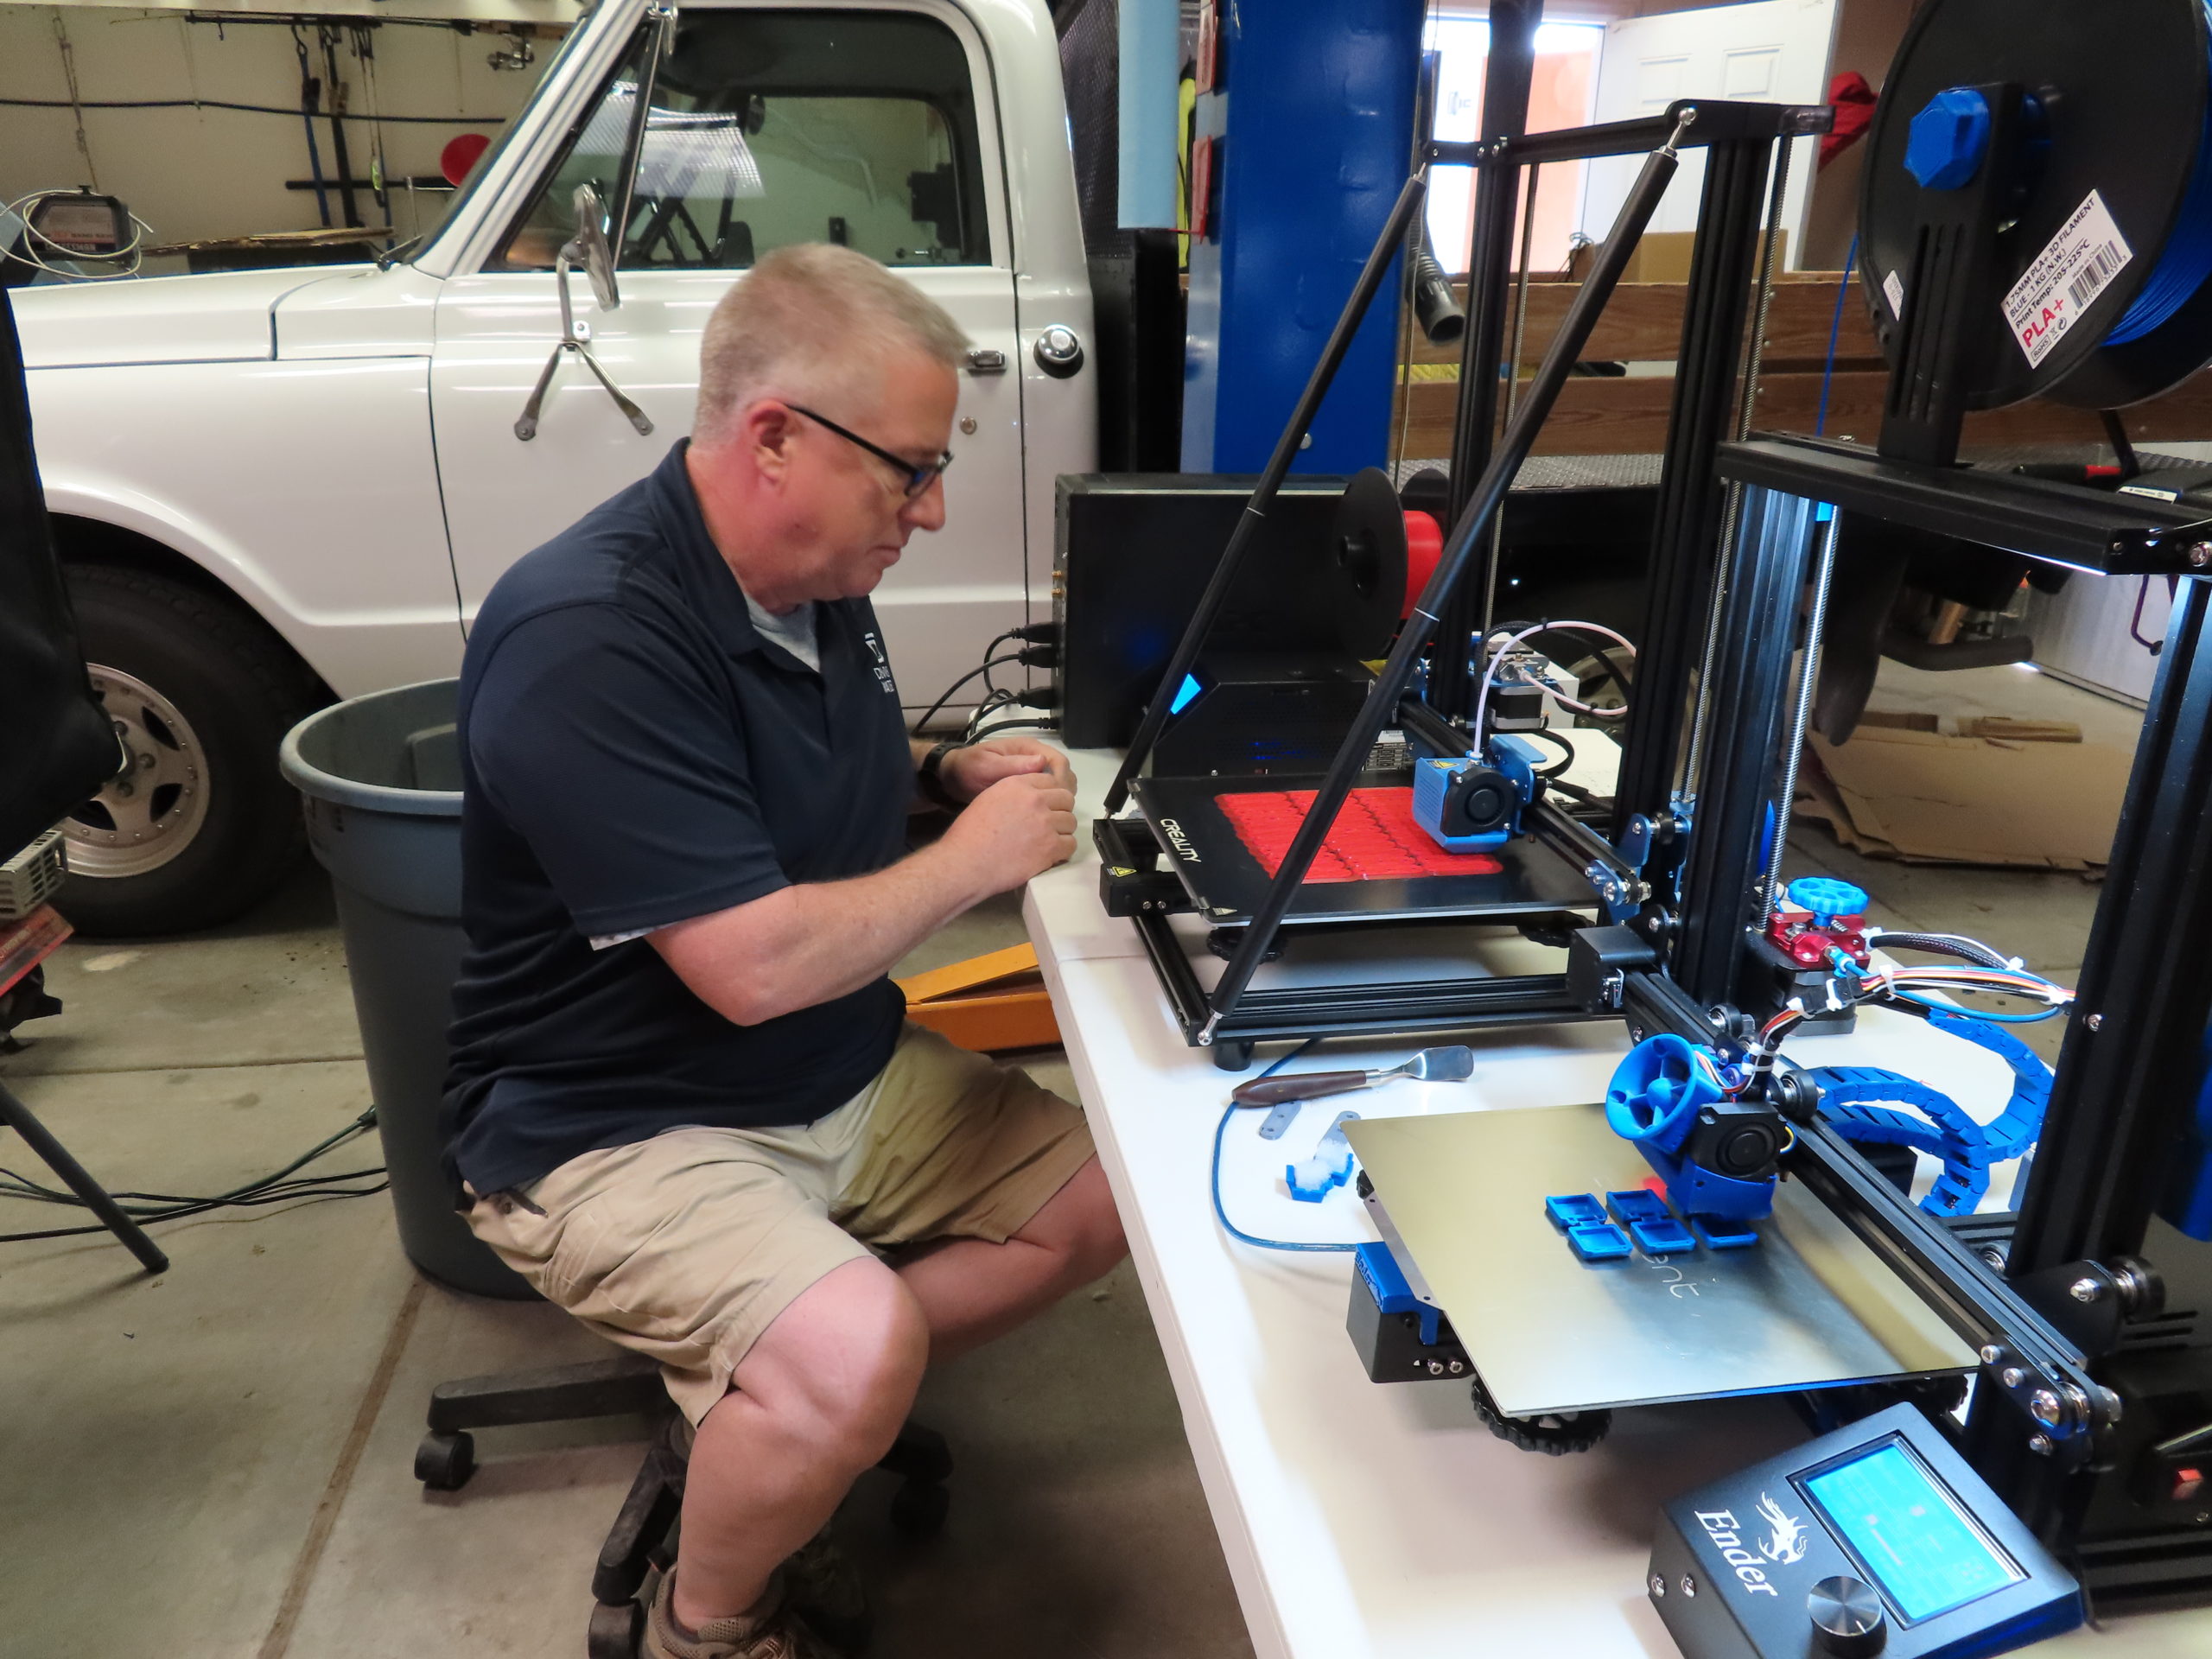 Mark Thomas, IT manager at Denver Water, uses a 3D printer to make plastic clips used to assemble homemade masks. Photo credit: Denver Water.